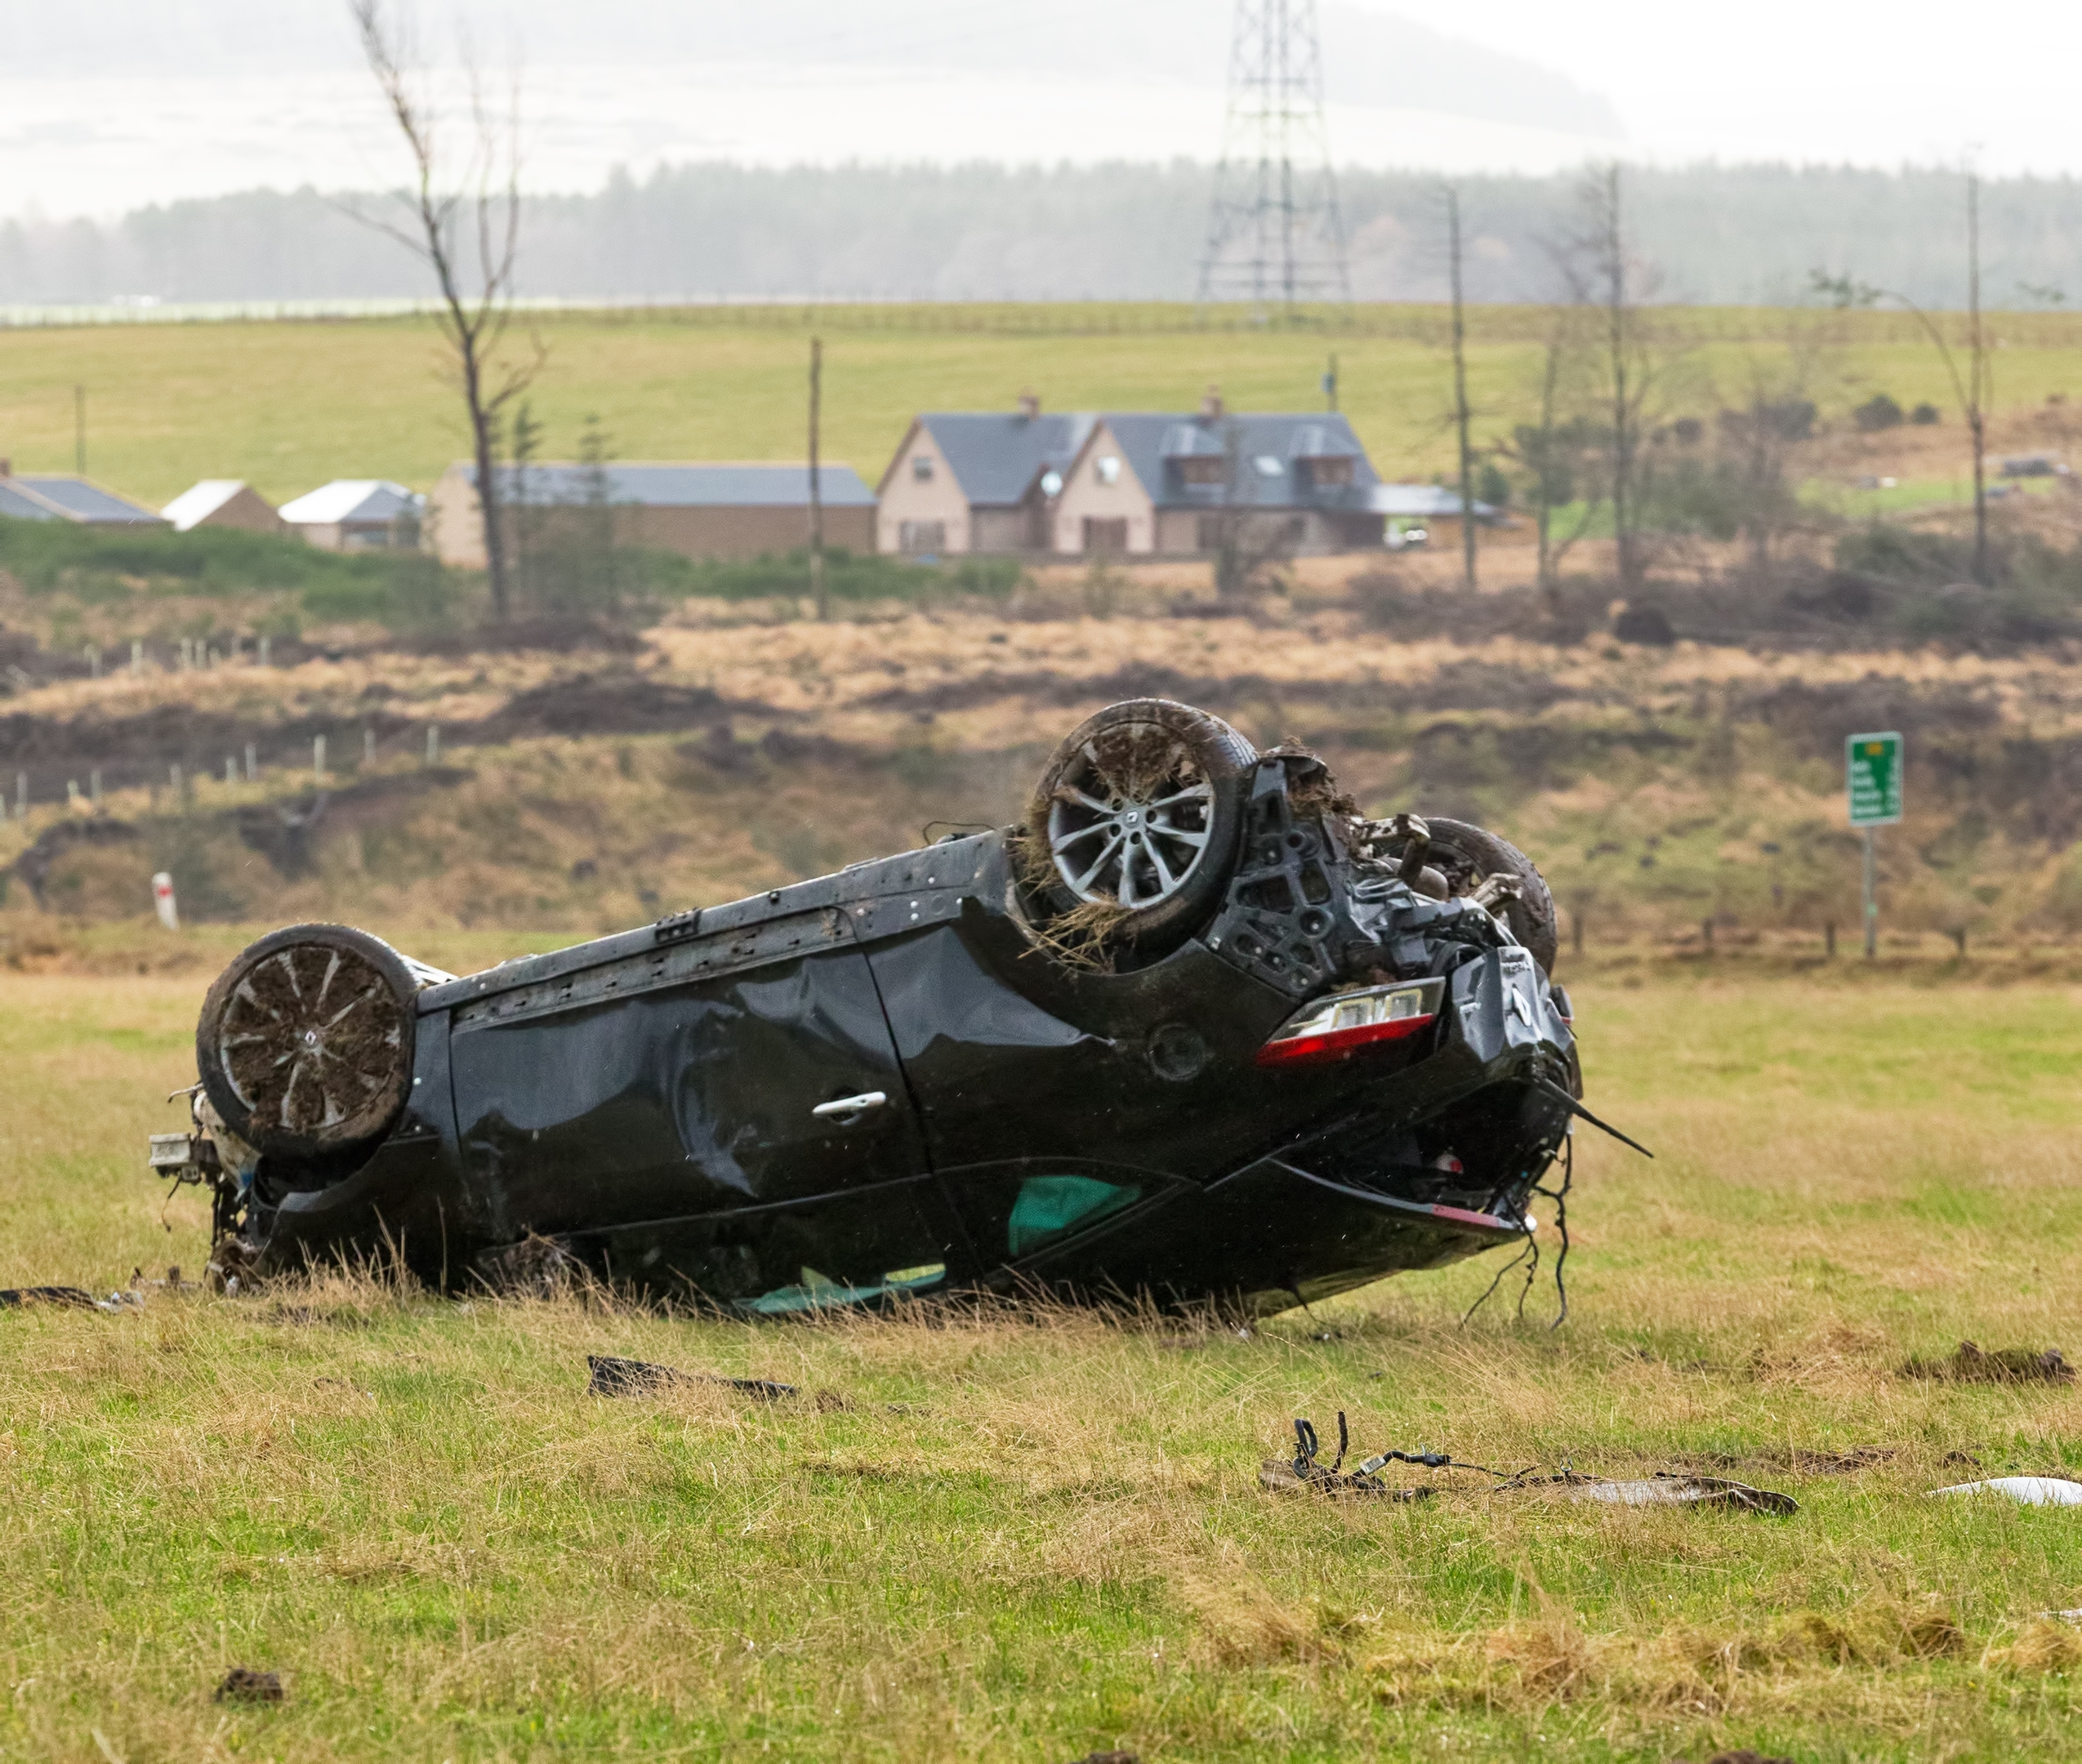 The car landed in a nearby field